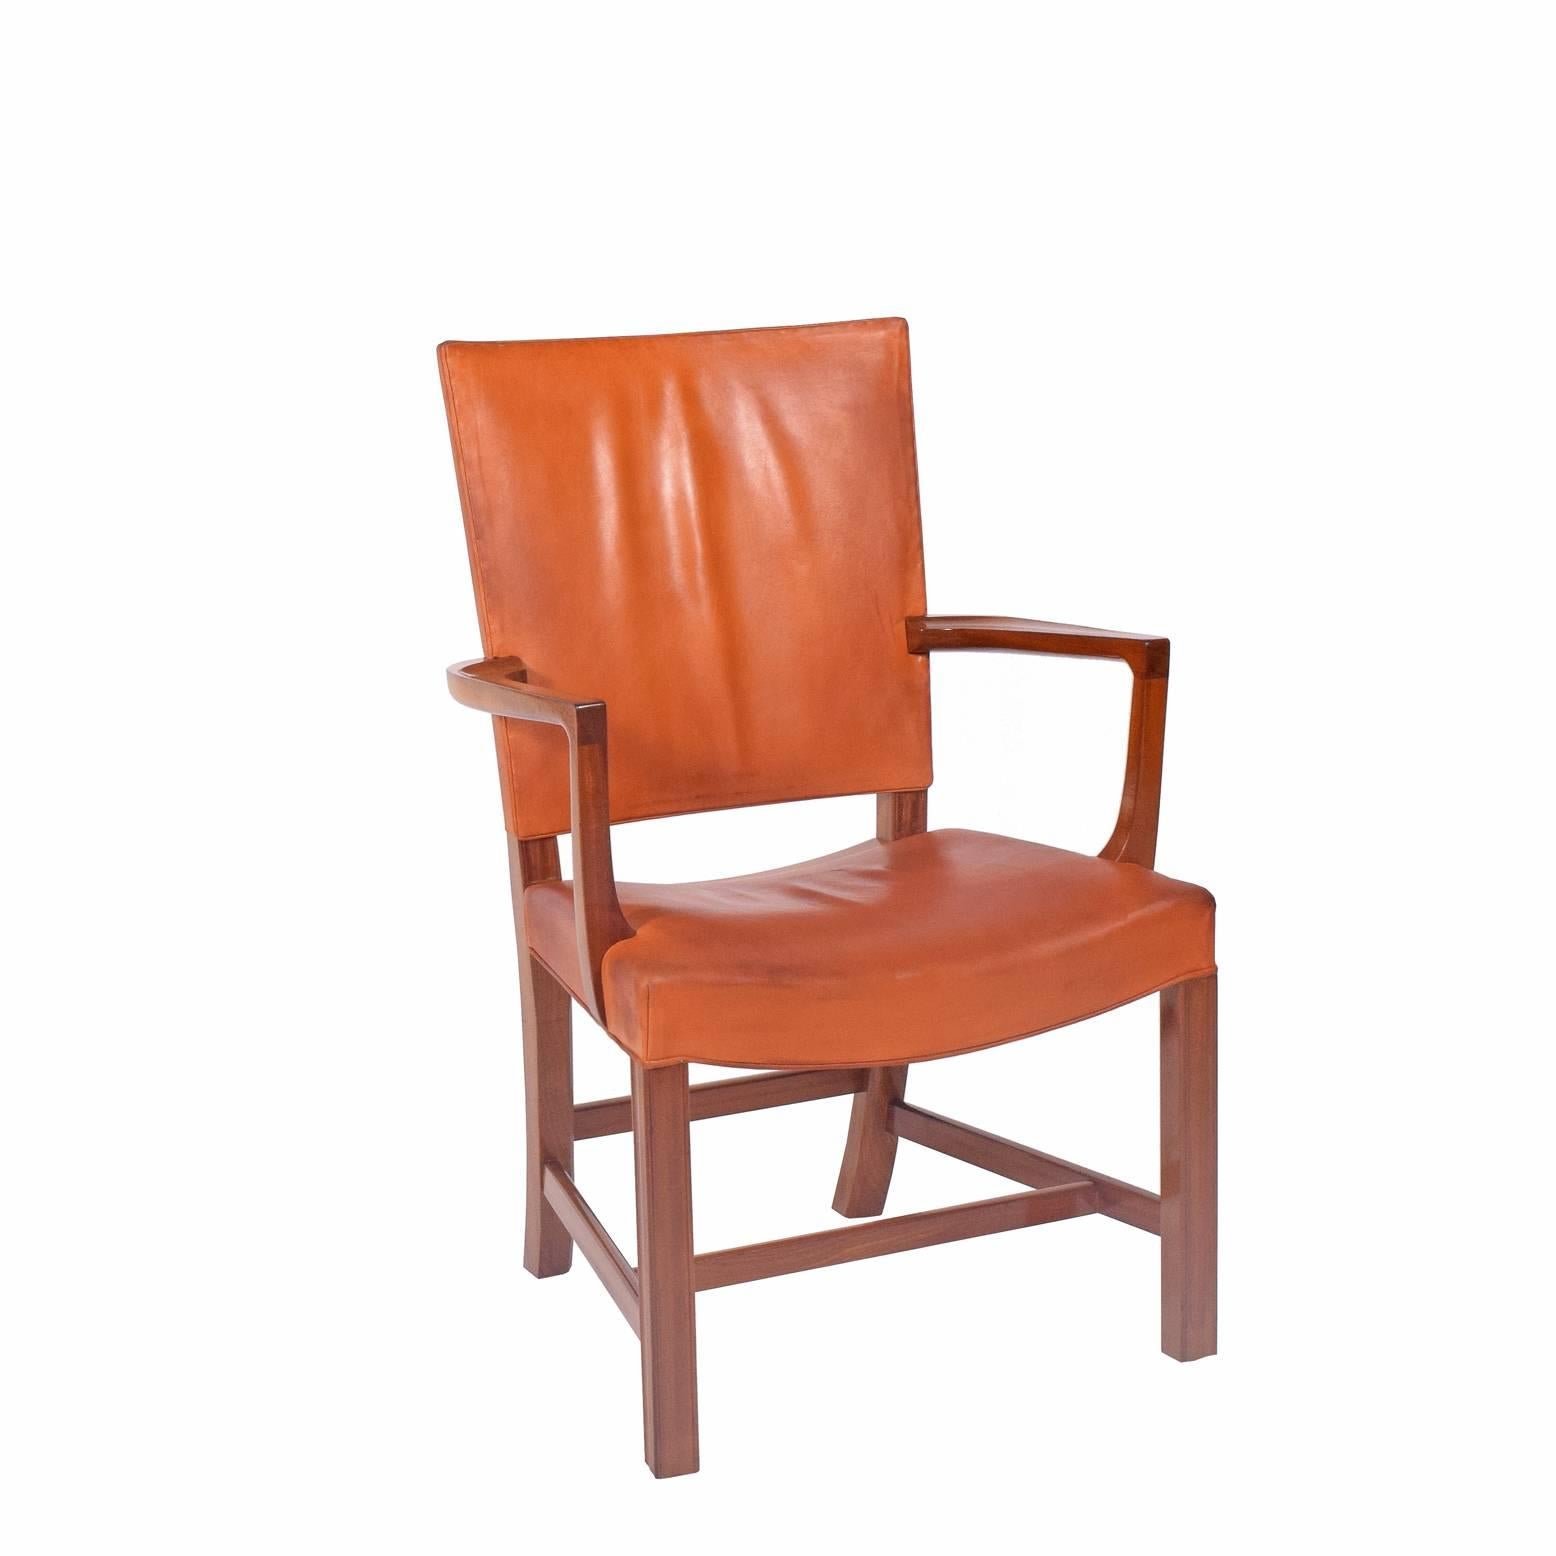 Mahogany and leather high back armchair. Awarded a prize at the Barcelona World Fair in 1929. Kaare Klint's design was inspired by English furniture maker Thomas Chippendale. Original paper label from Rud. Rasmussen cabinetmaker.